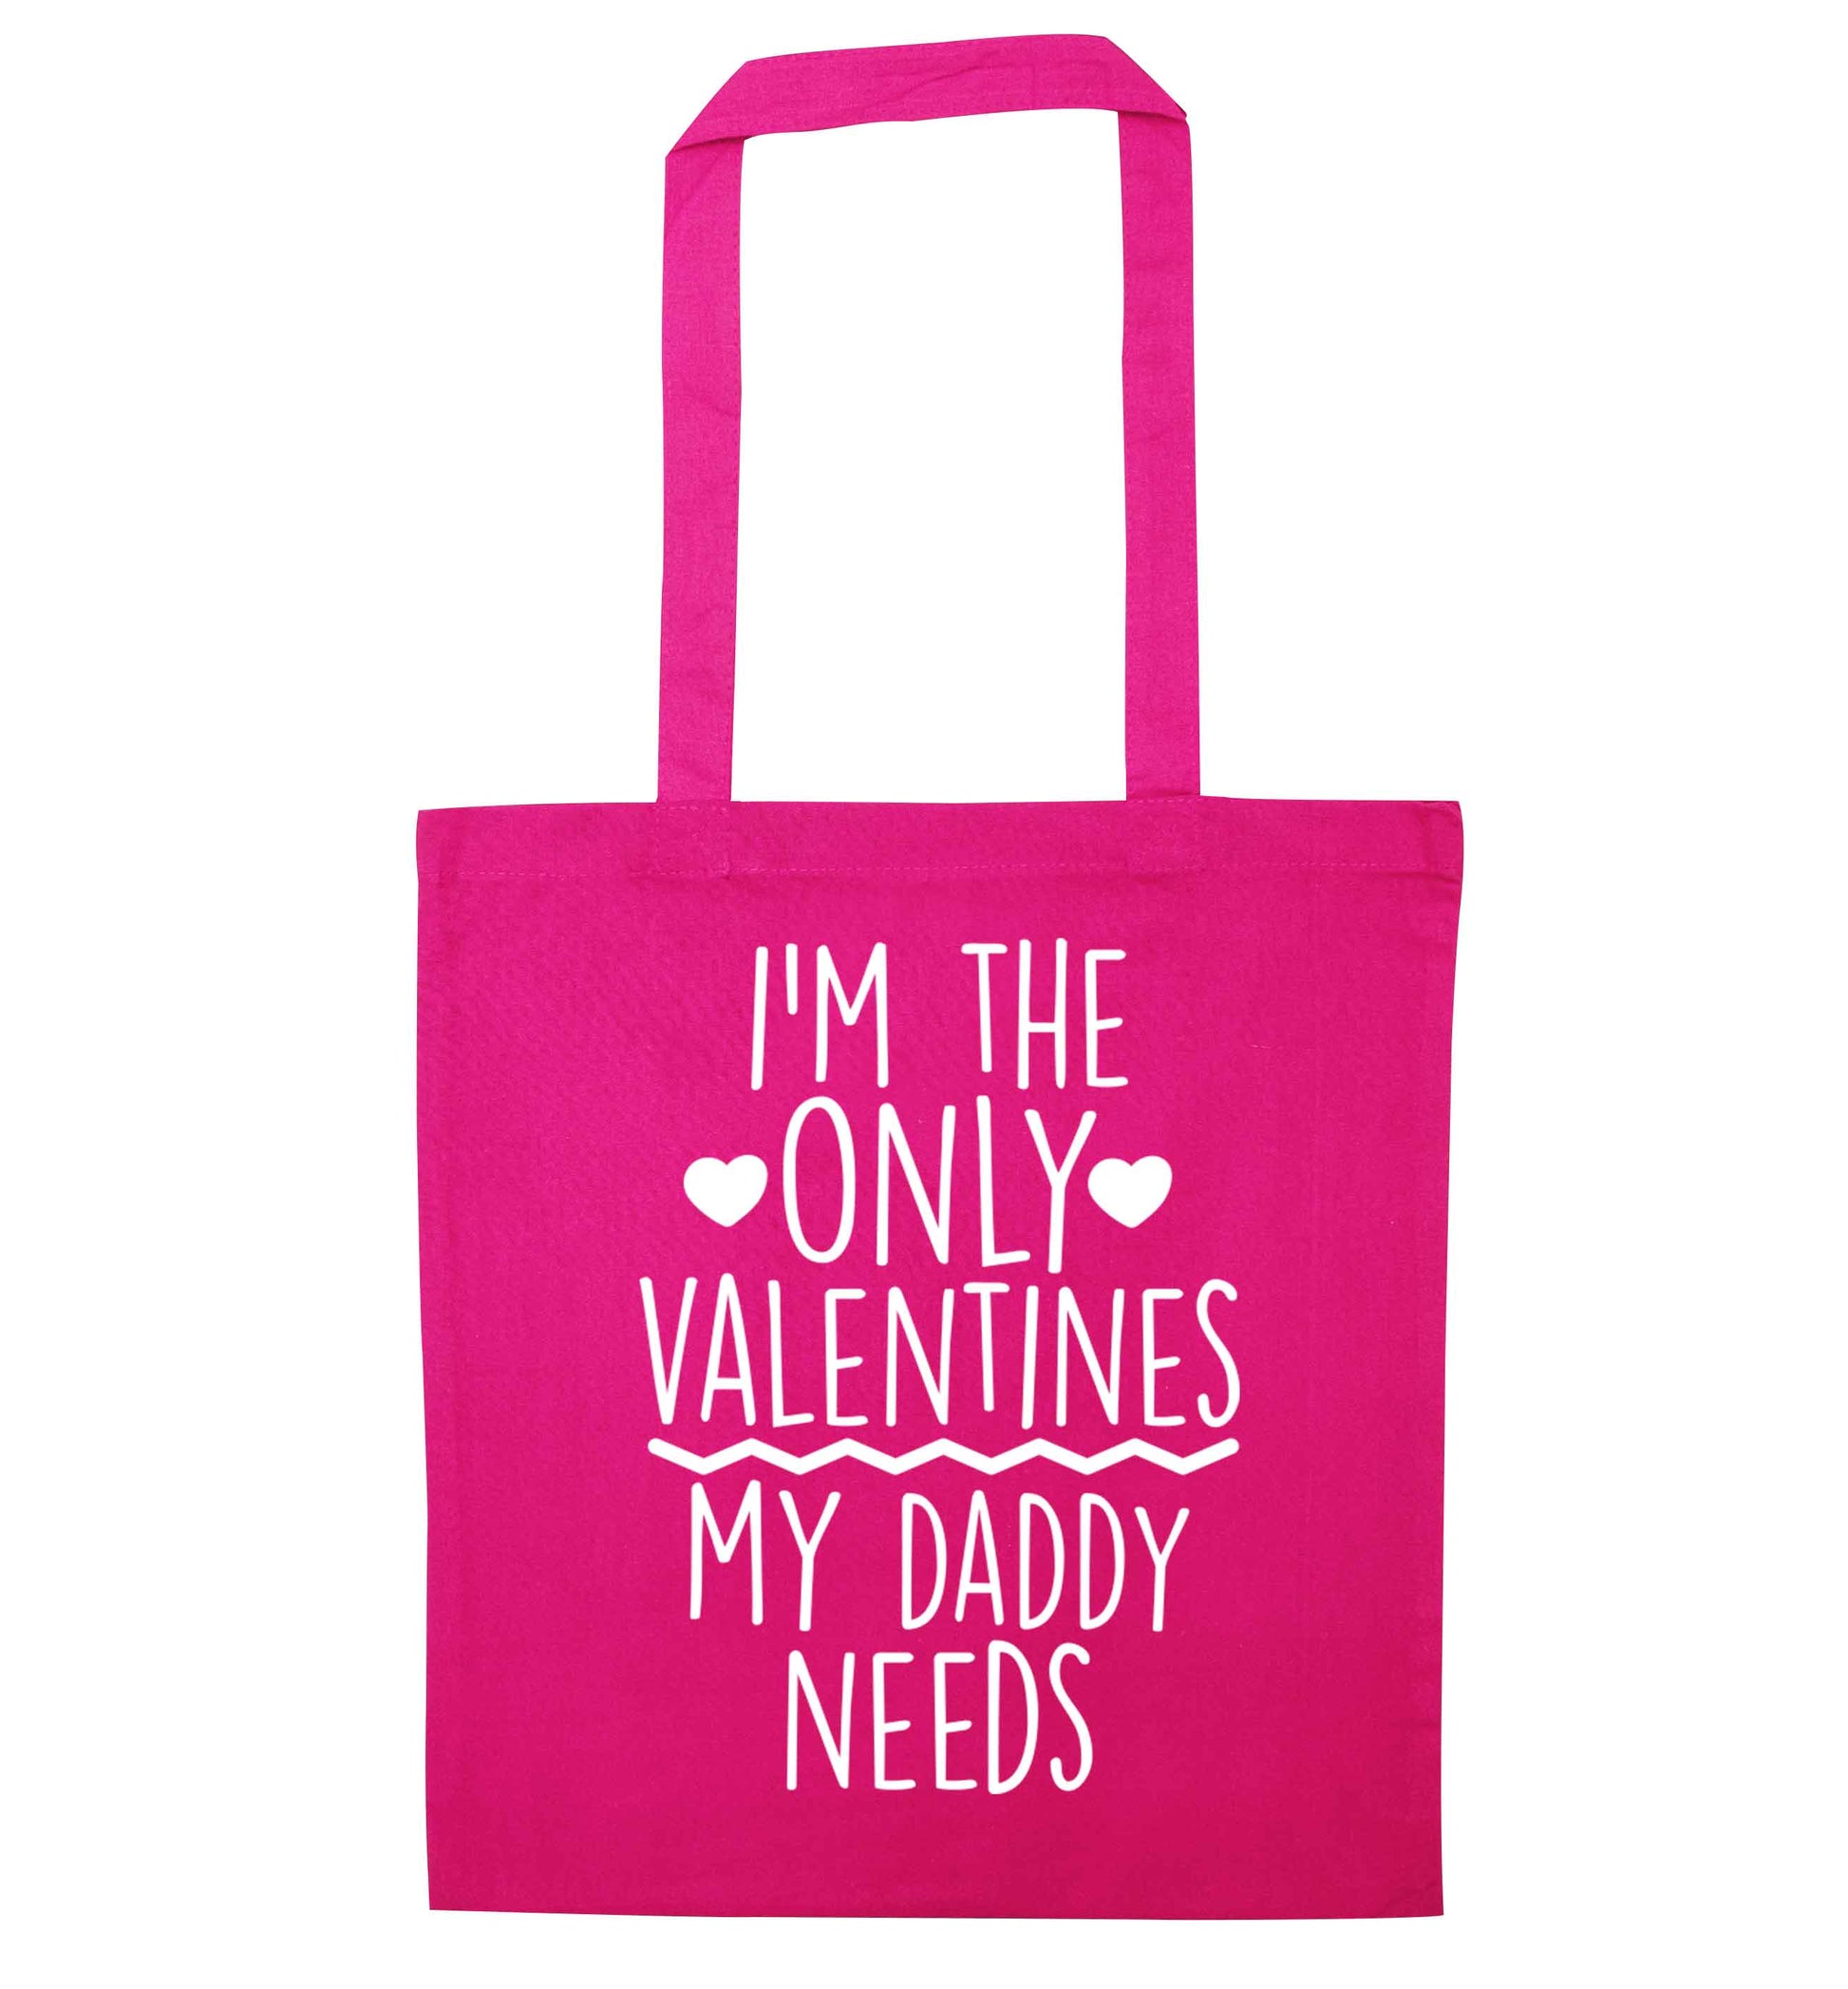 I'm the only valentines my daddy needs pink tote bag